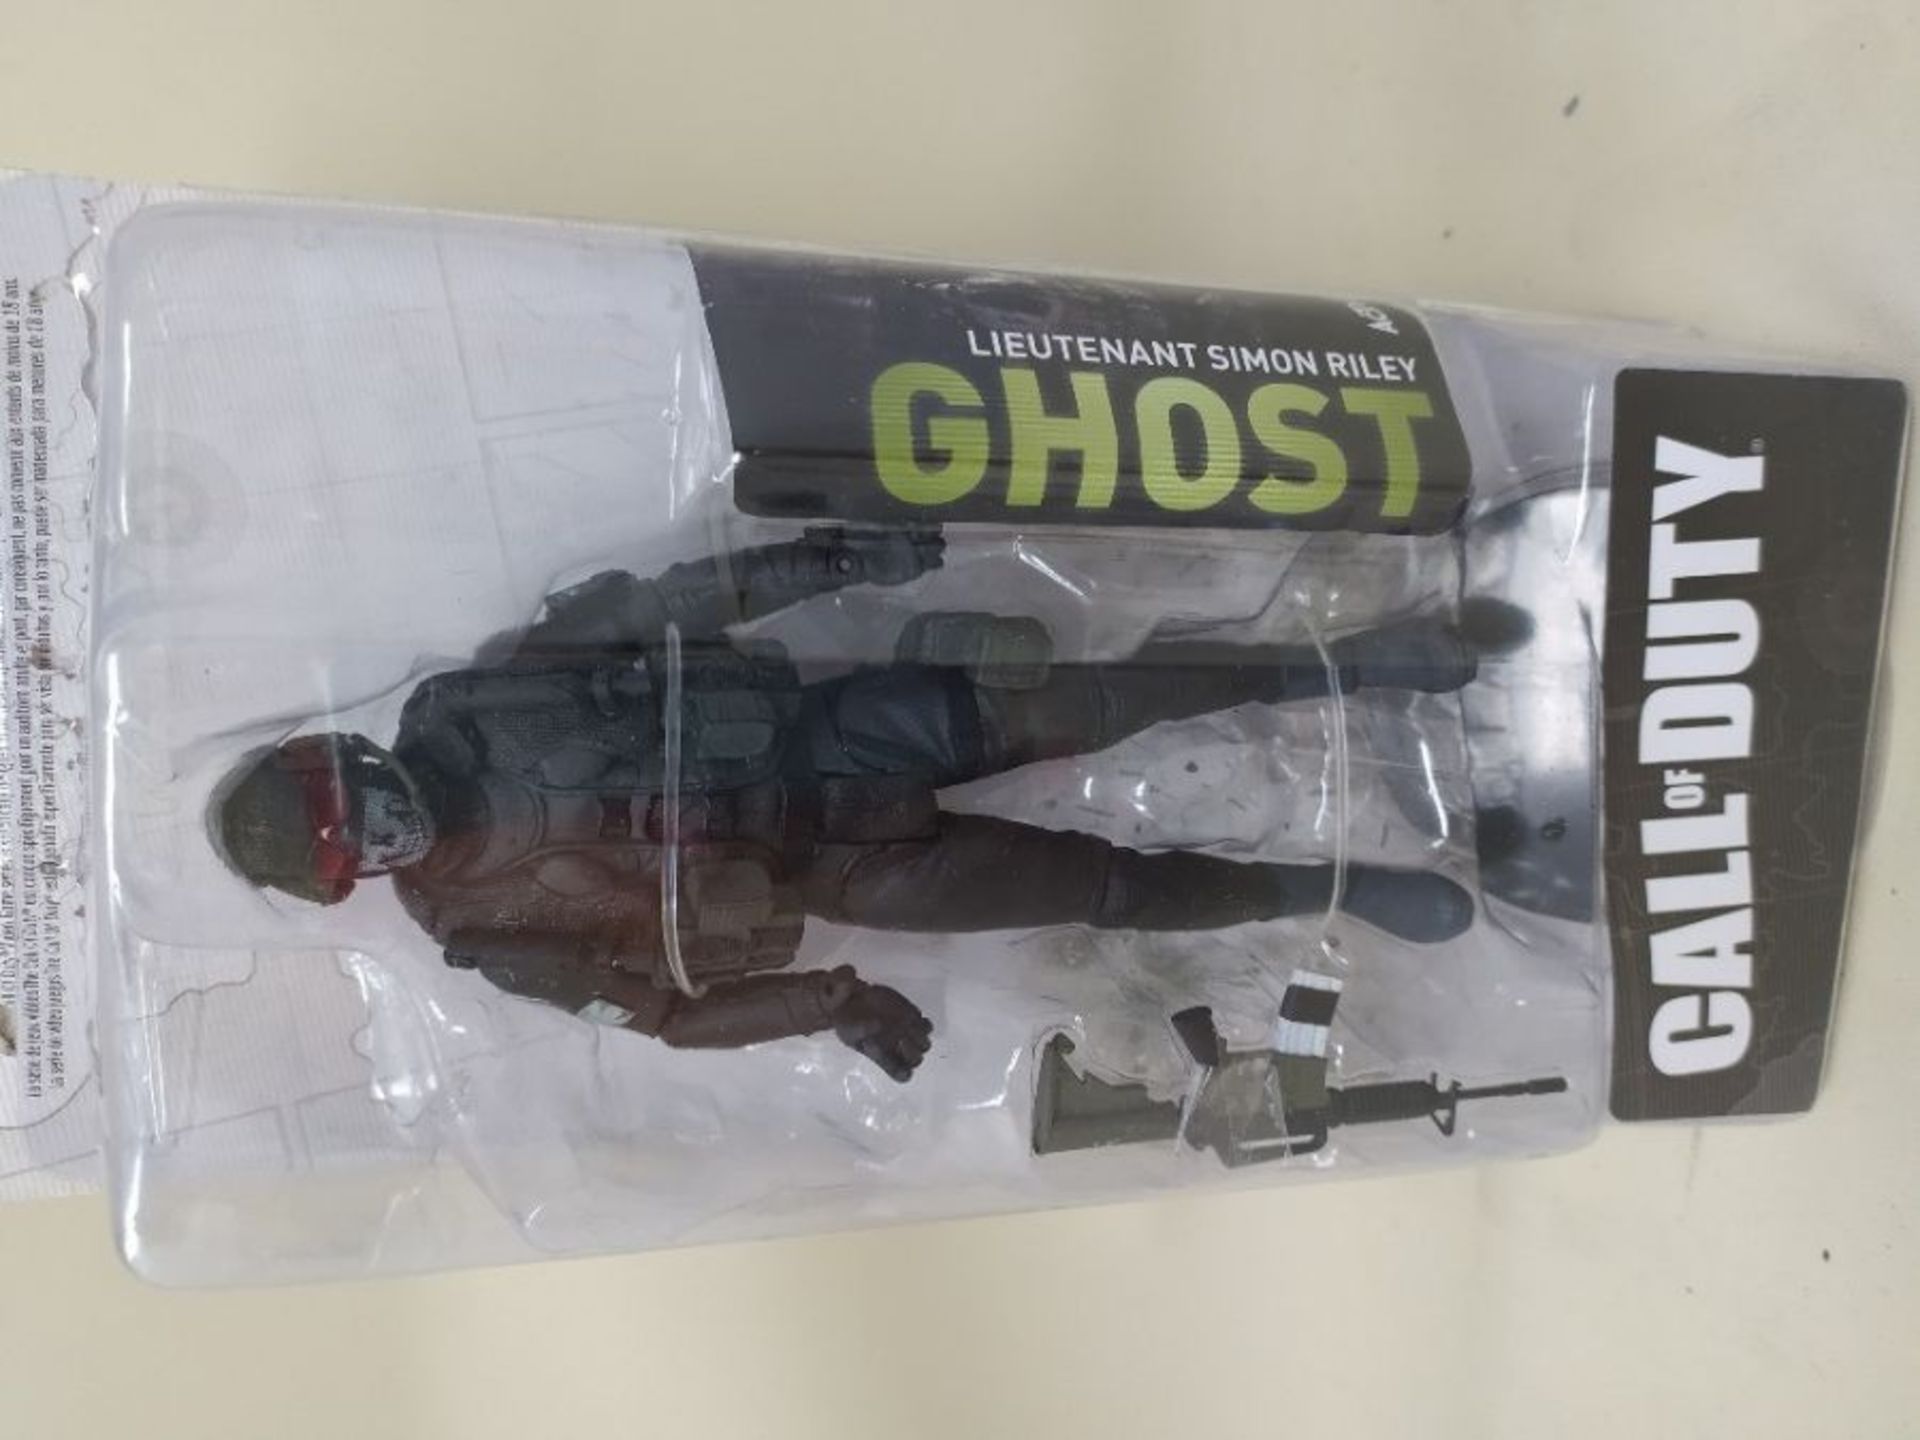 Call of Duty 10401 Ghost Action Figure, Black, Grey - Image 3 of 3